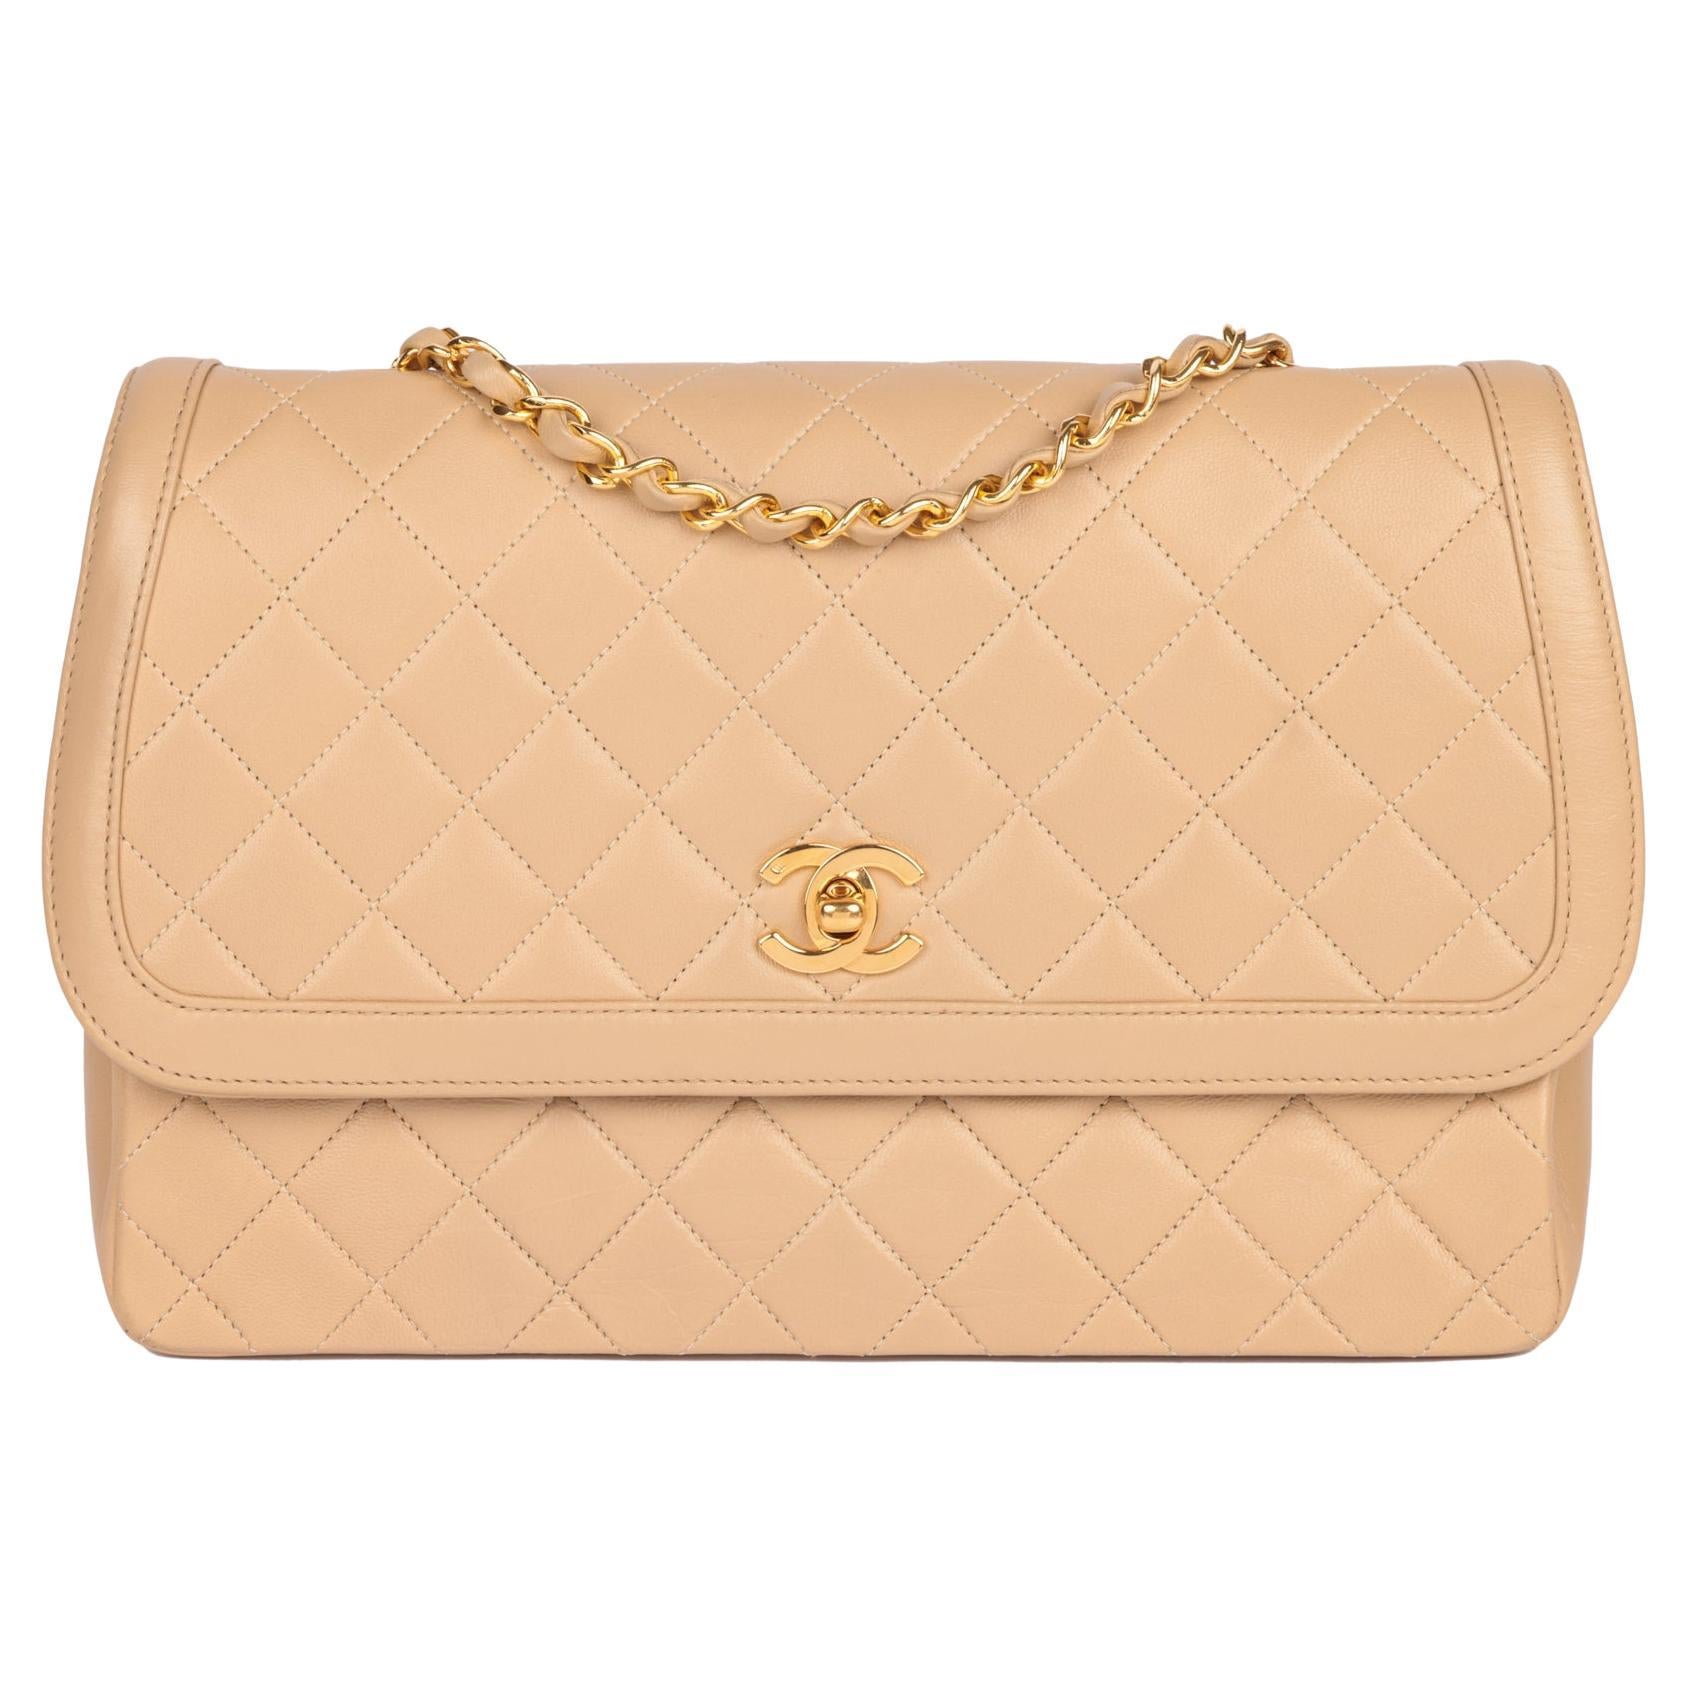 CHANEL Beige Quilted Lambskin Vintage Medium Classic Single Flap Bag with Wallet